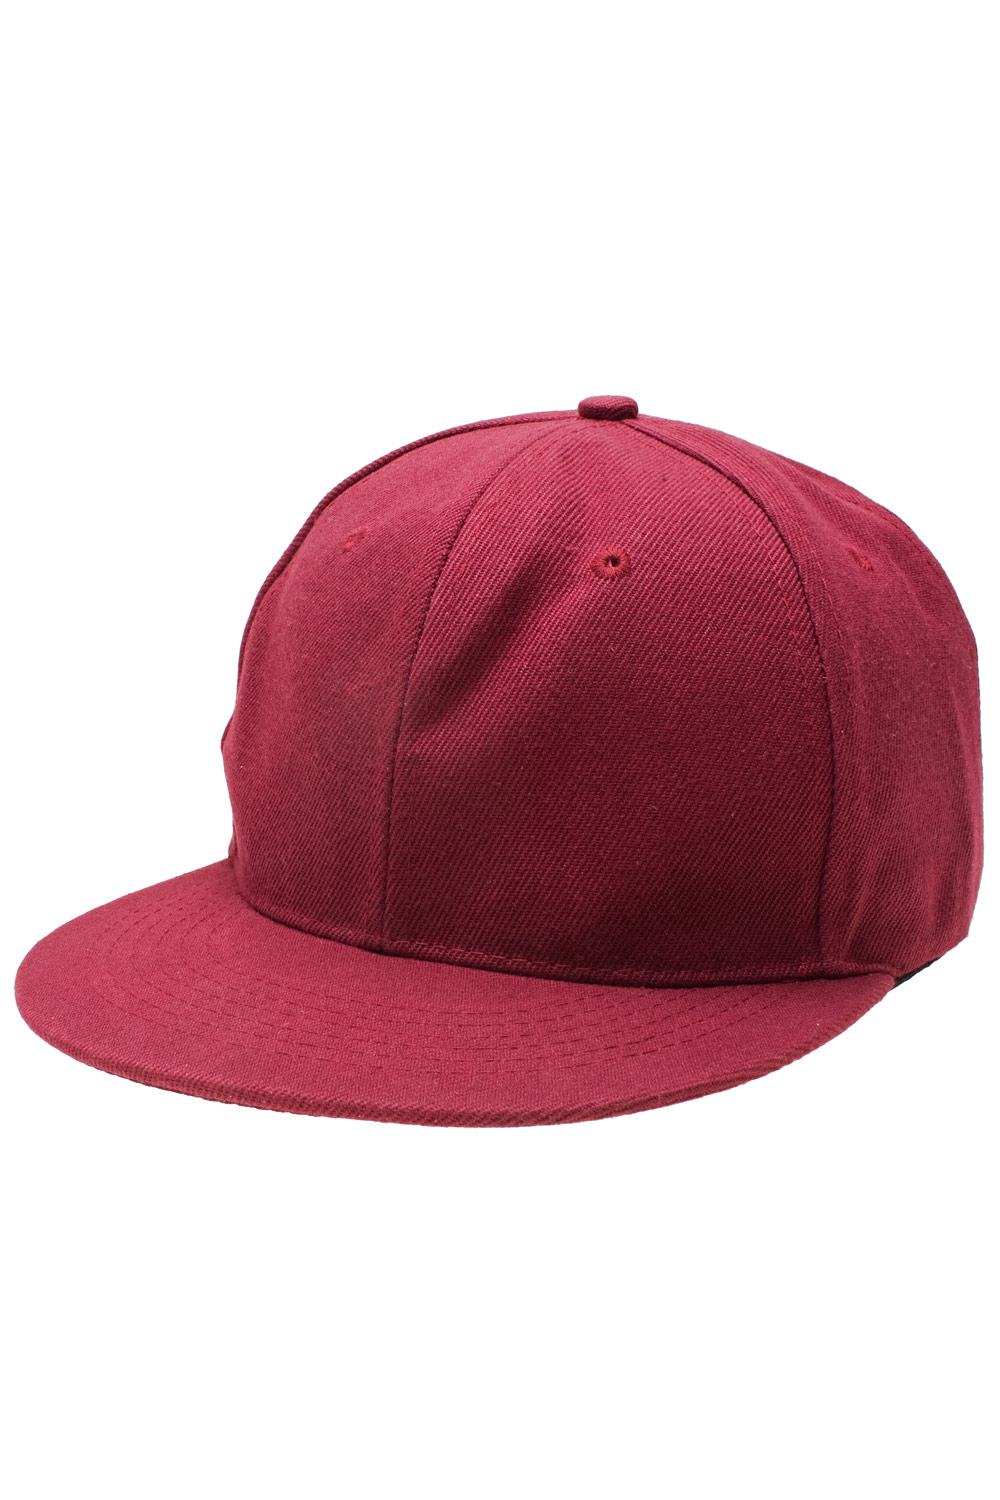 7XCOLLECTION by TANAMY cap at oboy.com